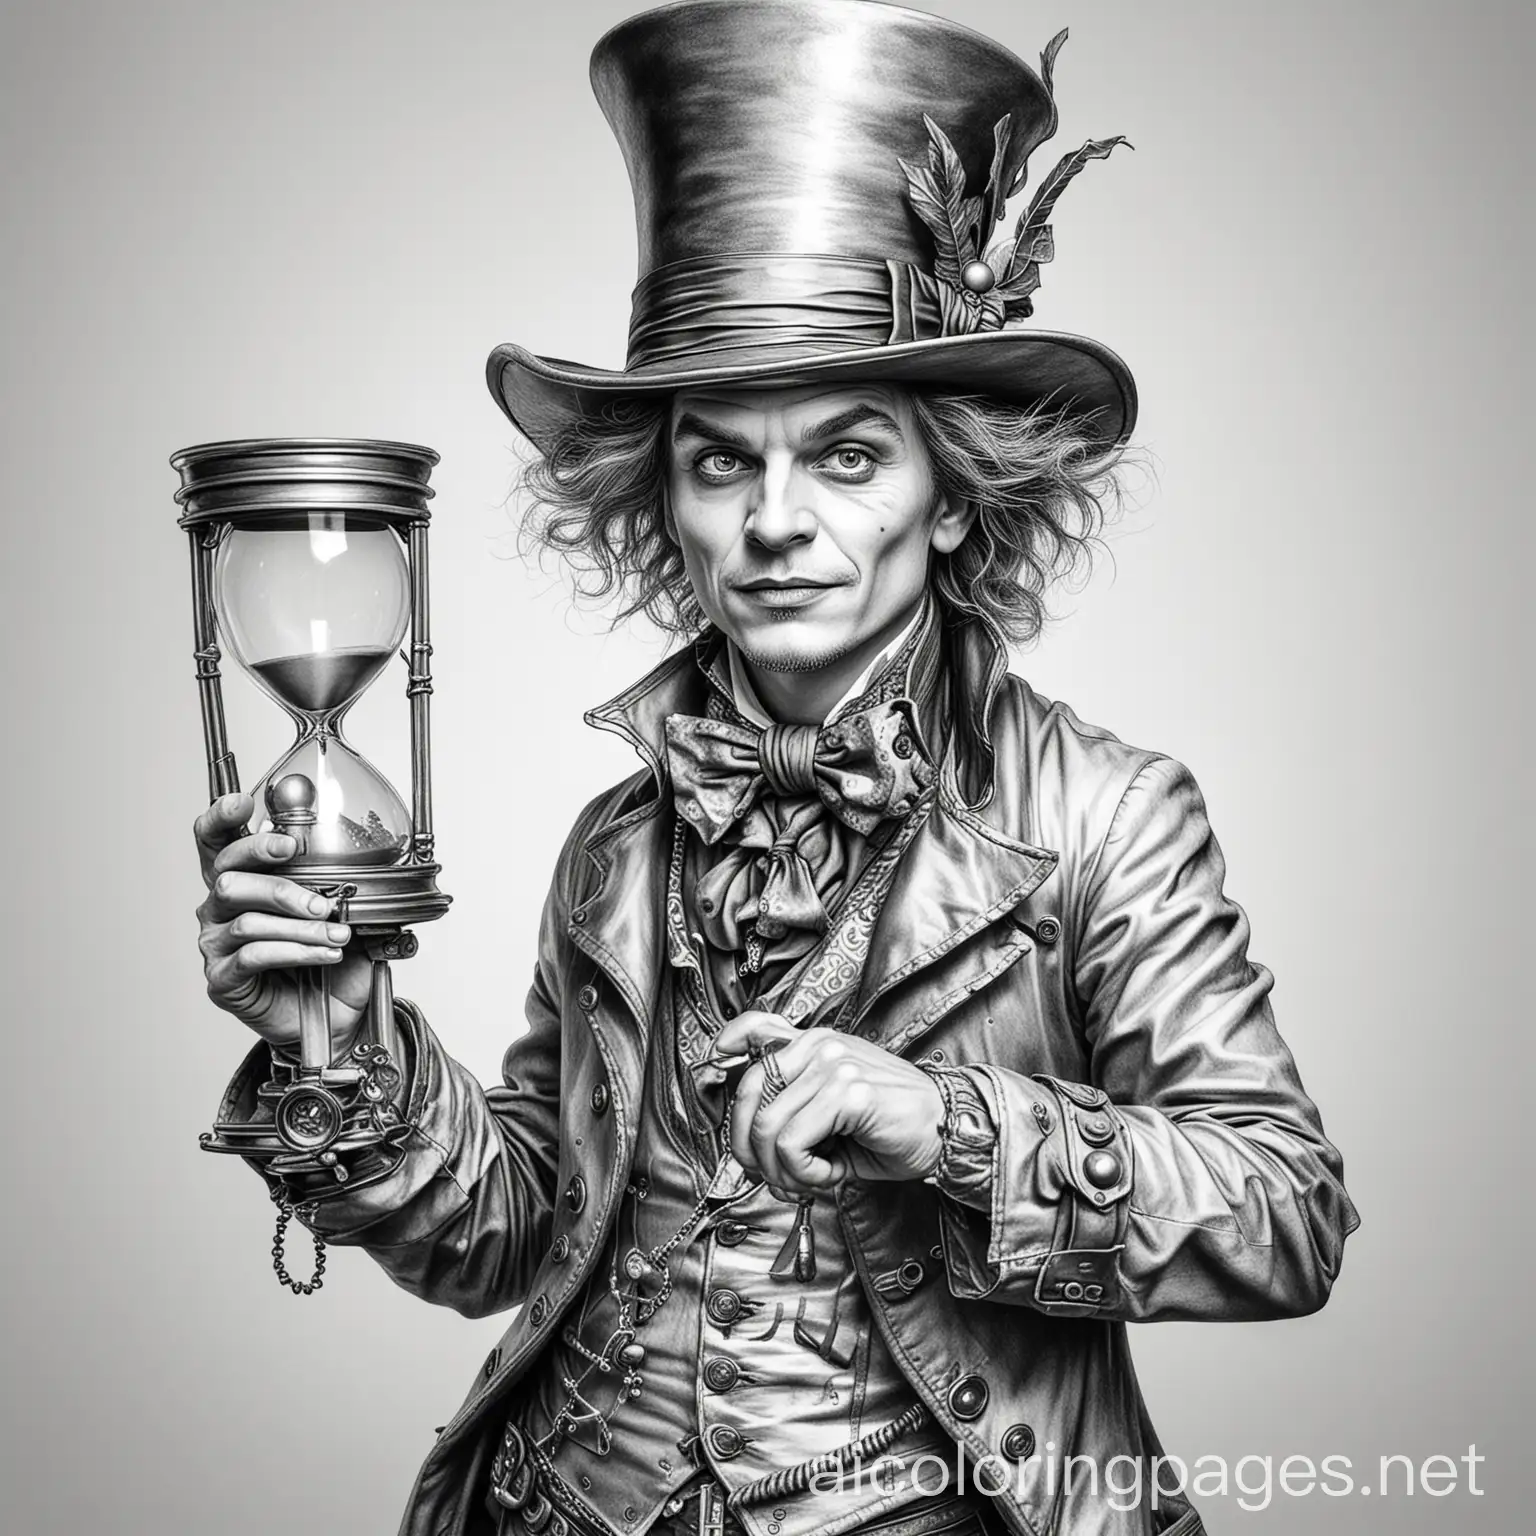 The mad hatter holding an hourglass and a machine gun, Coloring Page, black and white, line art, white background, Simplicity, Ample White Space. The background of the coloring page is plain white to make it easy for young children to color within the lines. The outlines of all the subjects are easy to distinguish, making it simple for kids to color without too much difficulty